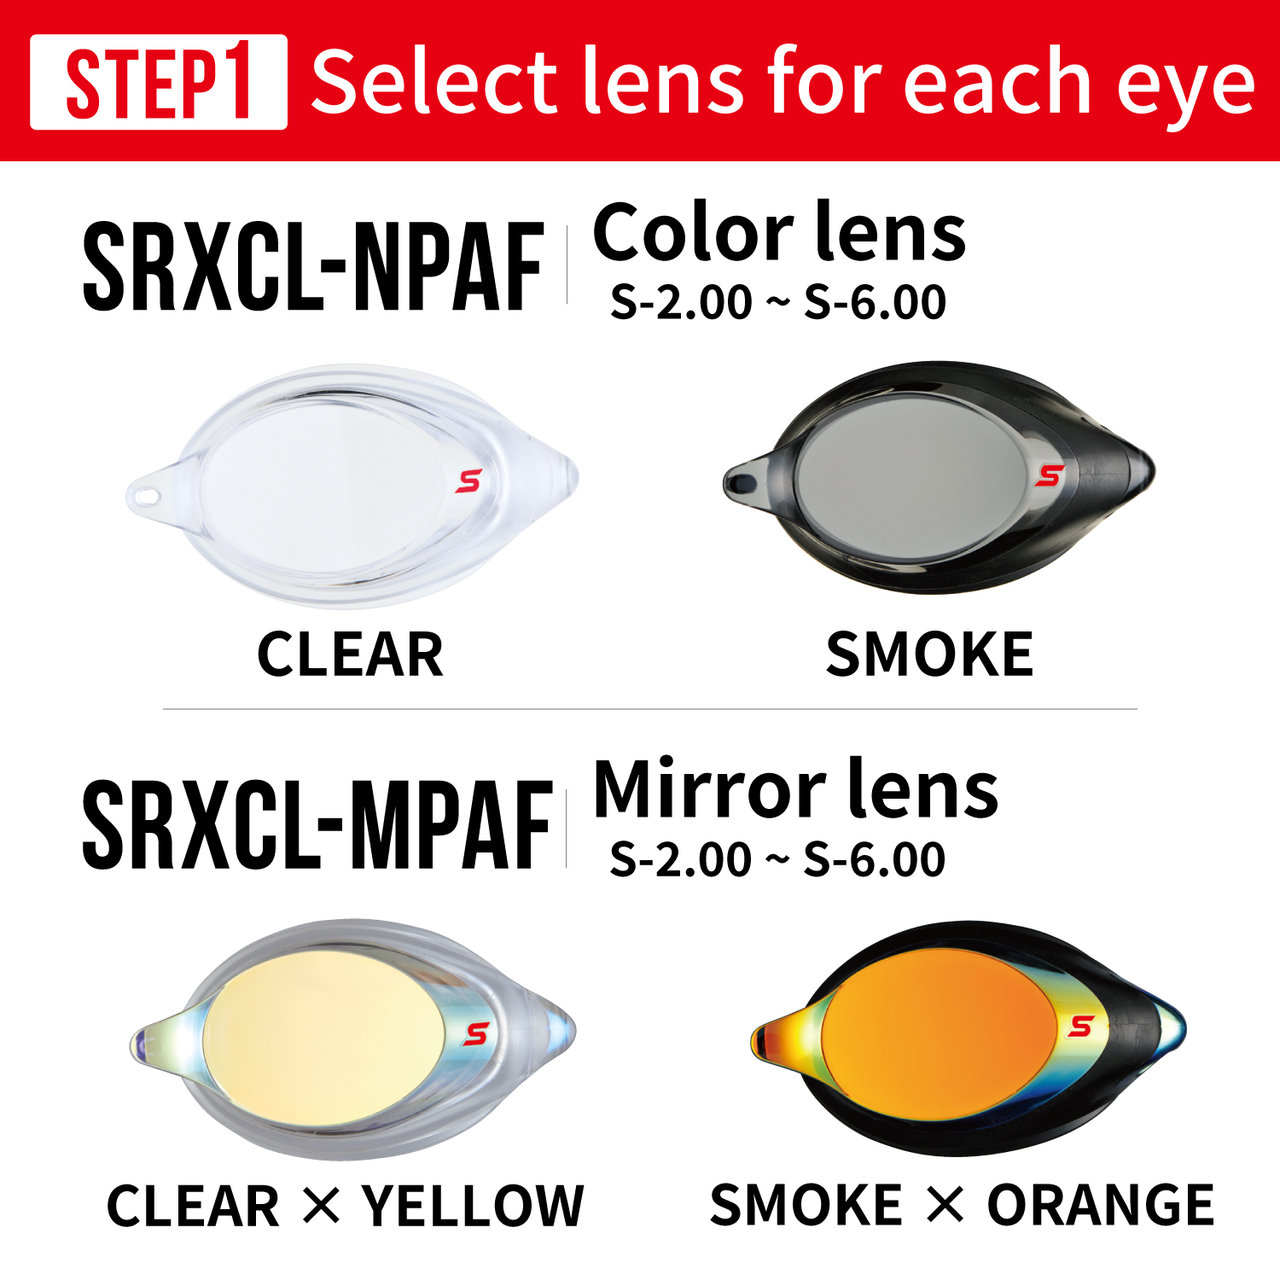 SRXCL-M PAF S-2.00 Clear x Yellow Mirror,Opt1, large image number 1